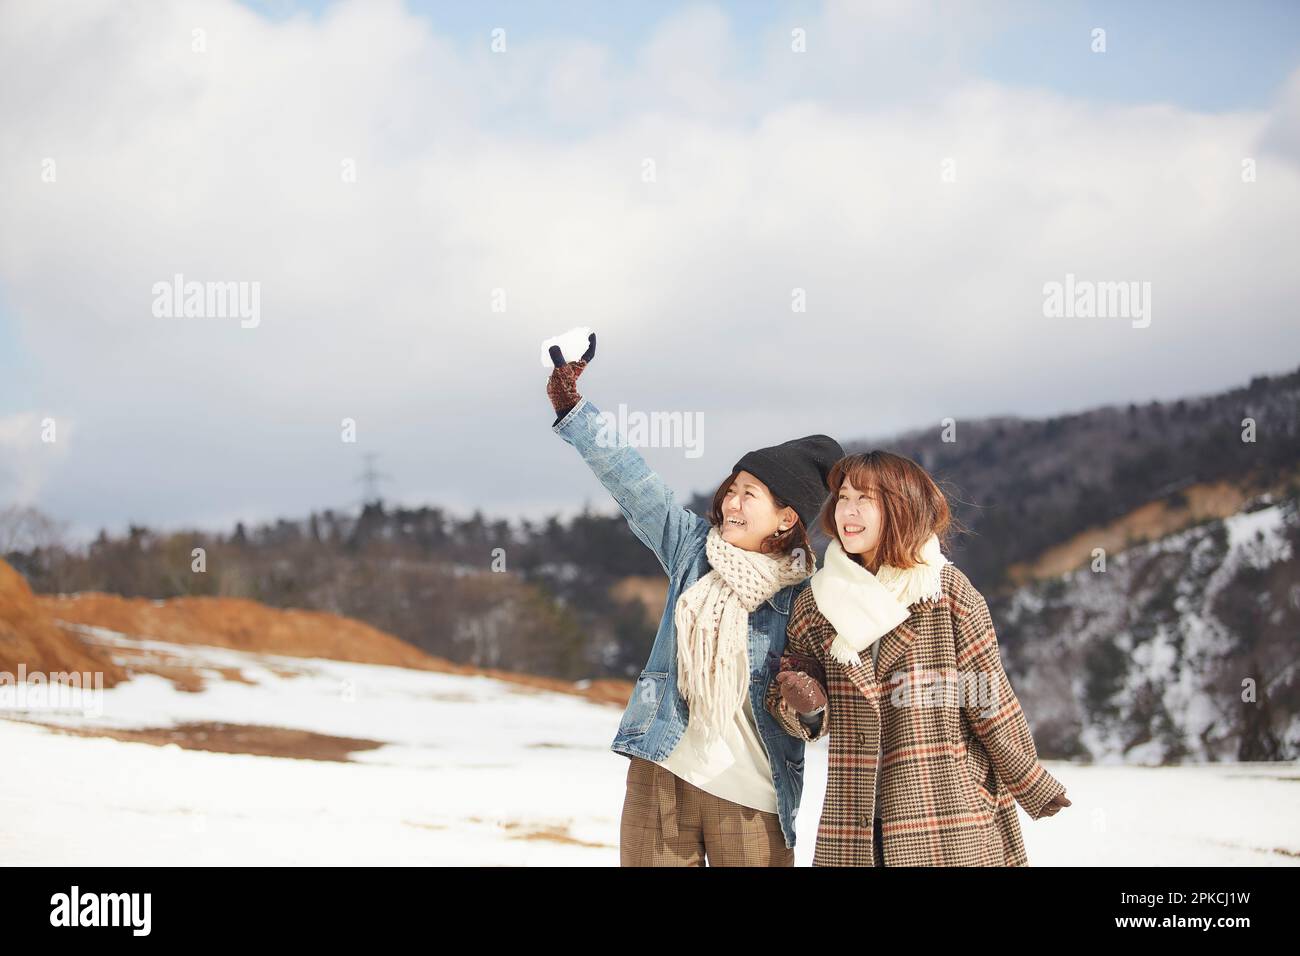 Two women playing in a snowy square Stock Photo